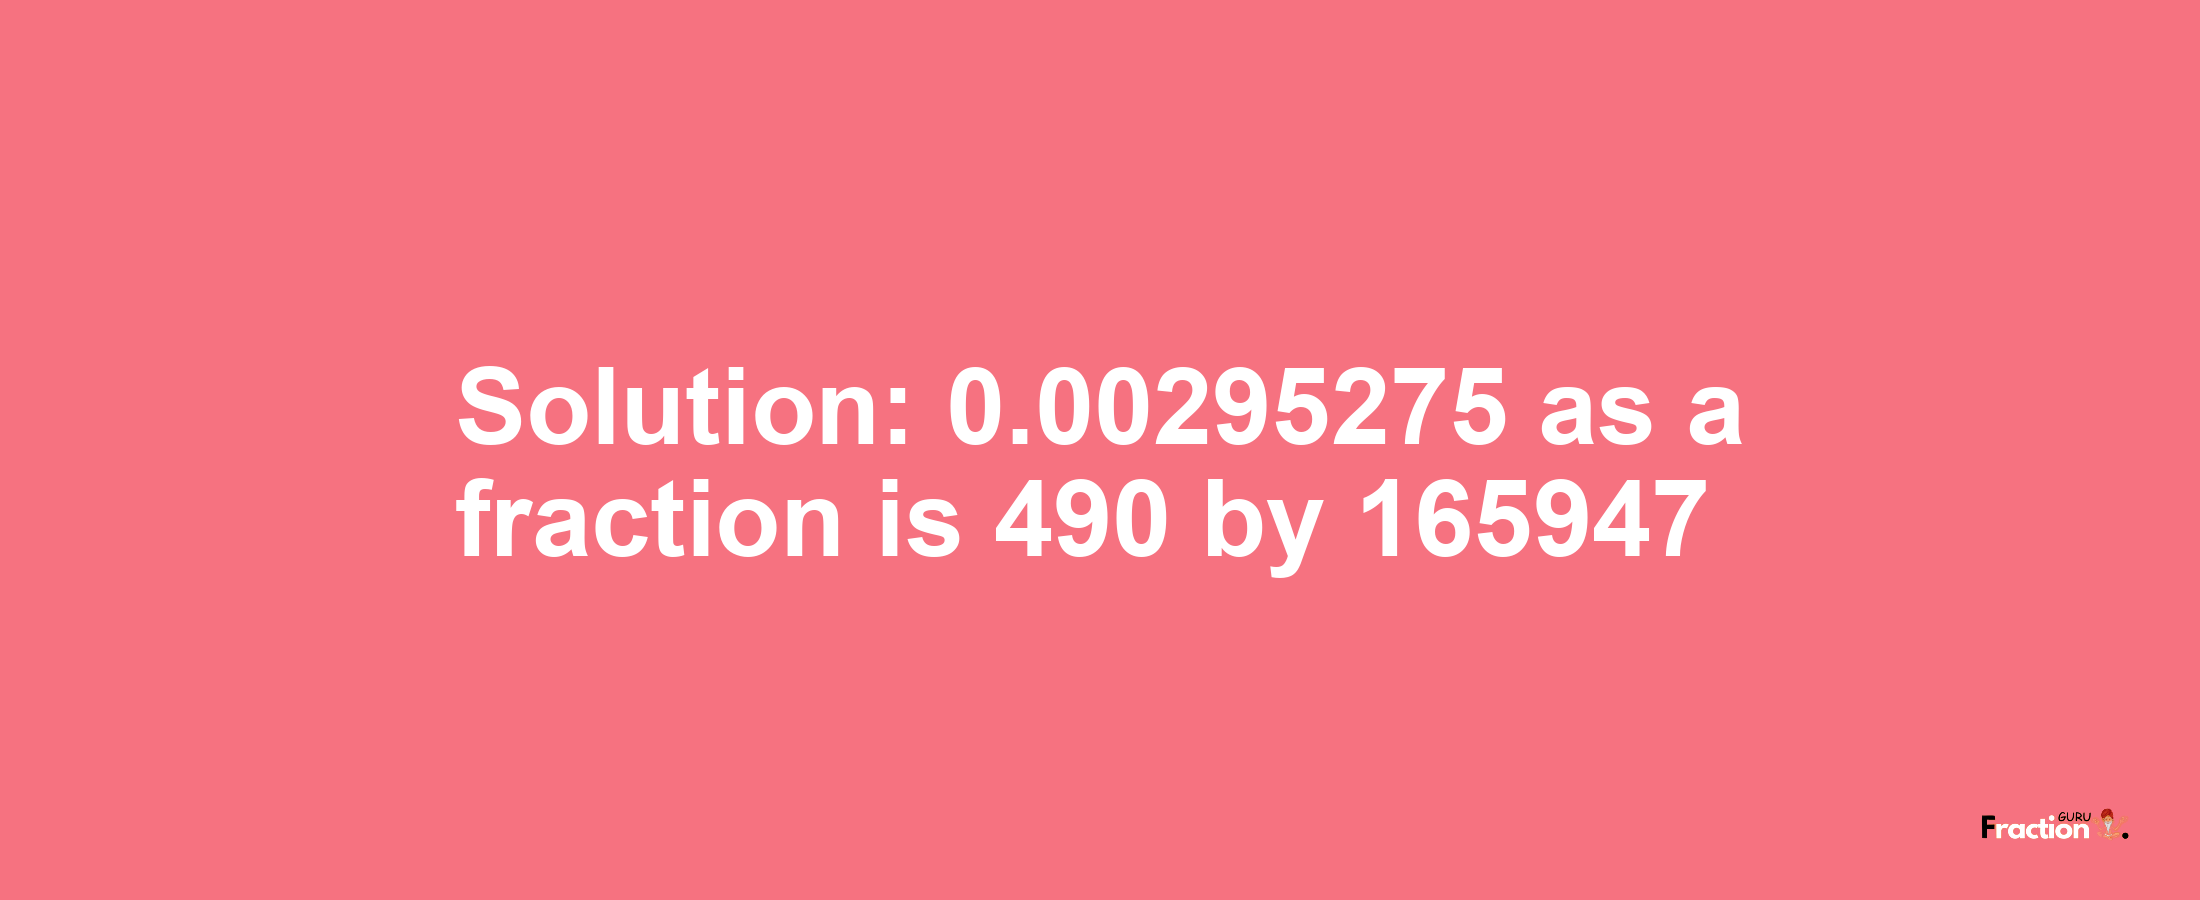 Solution:0.00295275 as a fraction is 490/165947